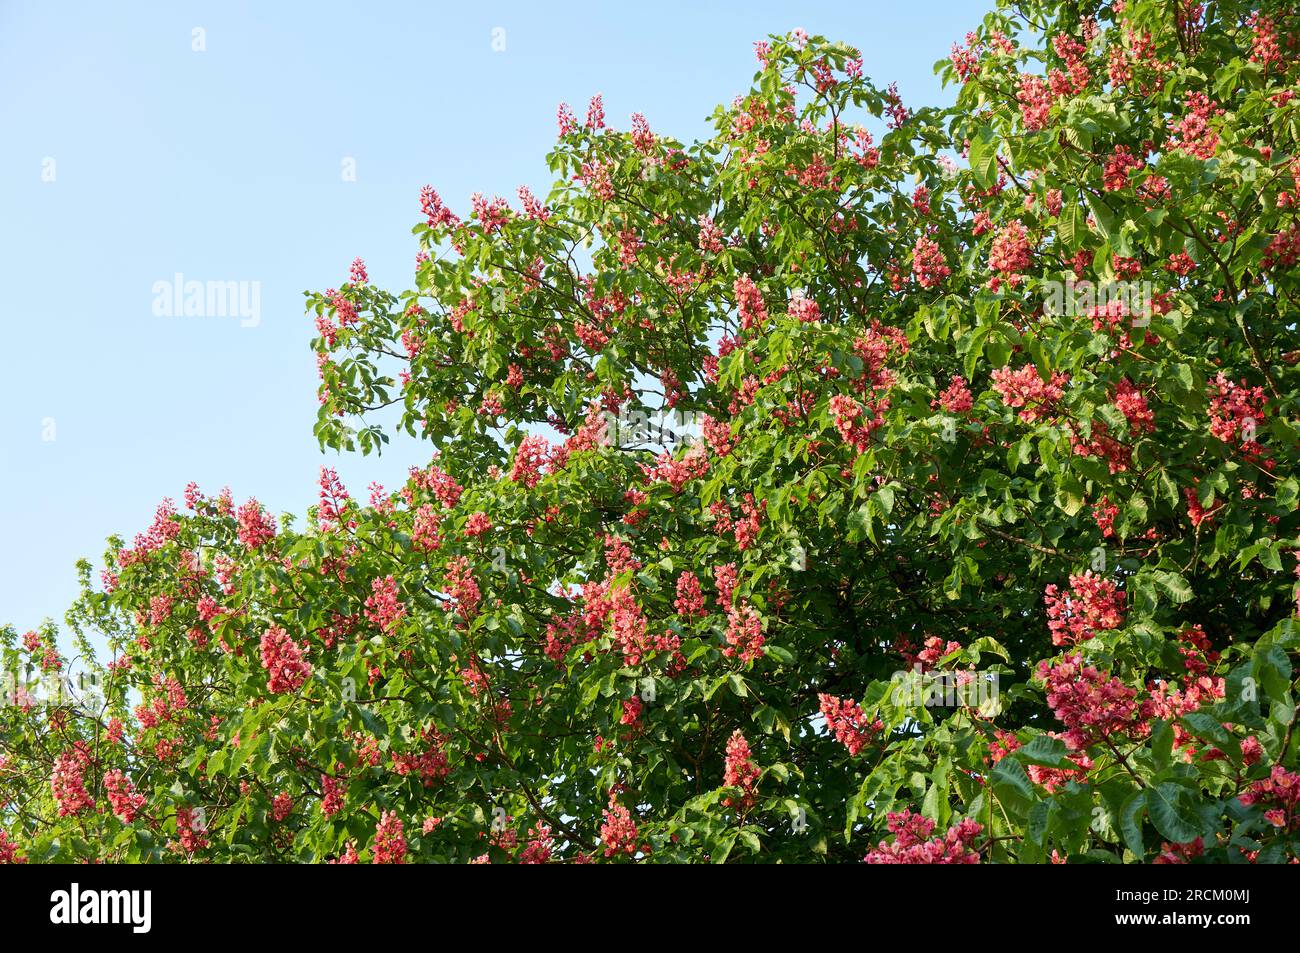 Red Horsechestnut tree (Aesculus x carnea)  blooming in spring, Vancouver, BC, Canada Stock Photo